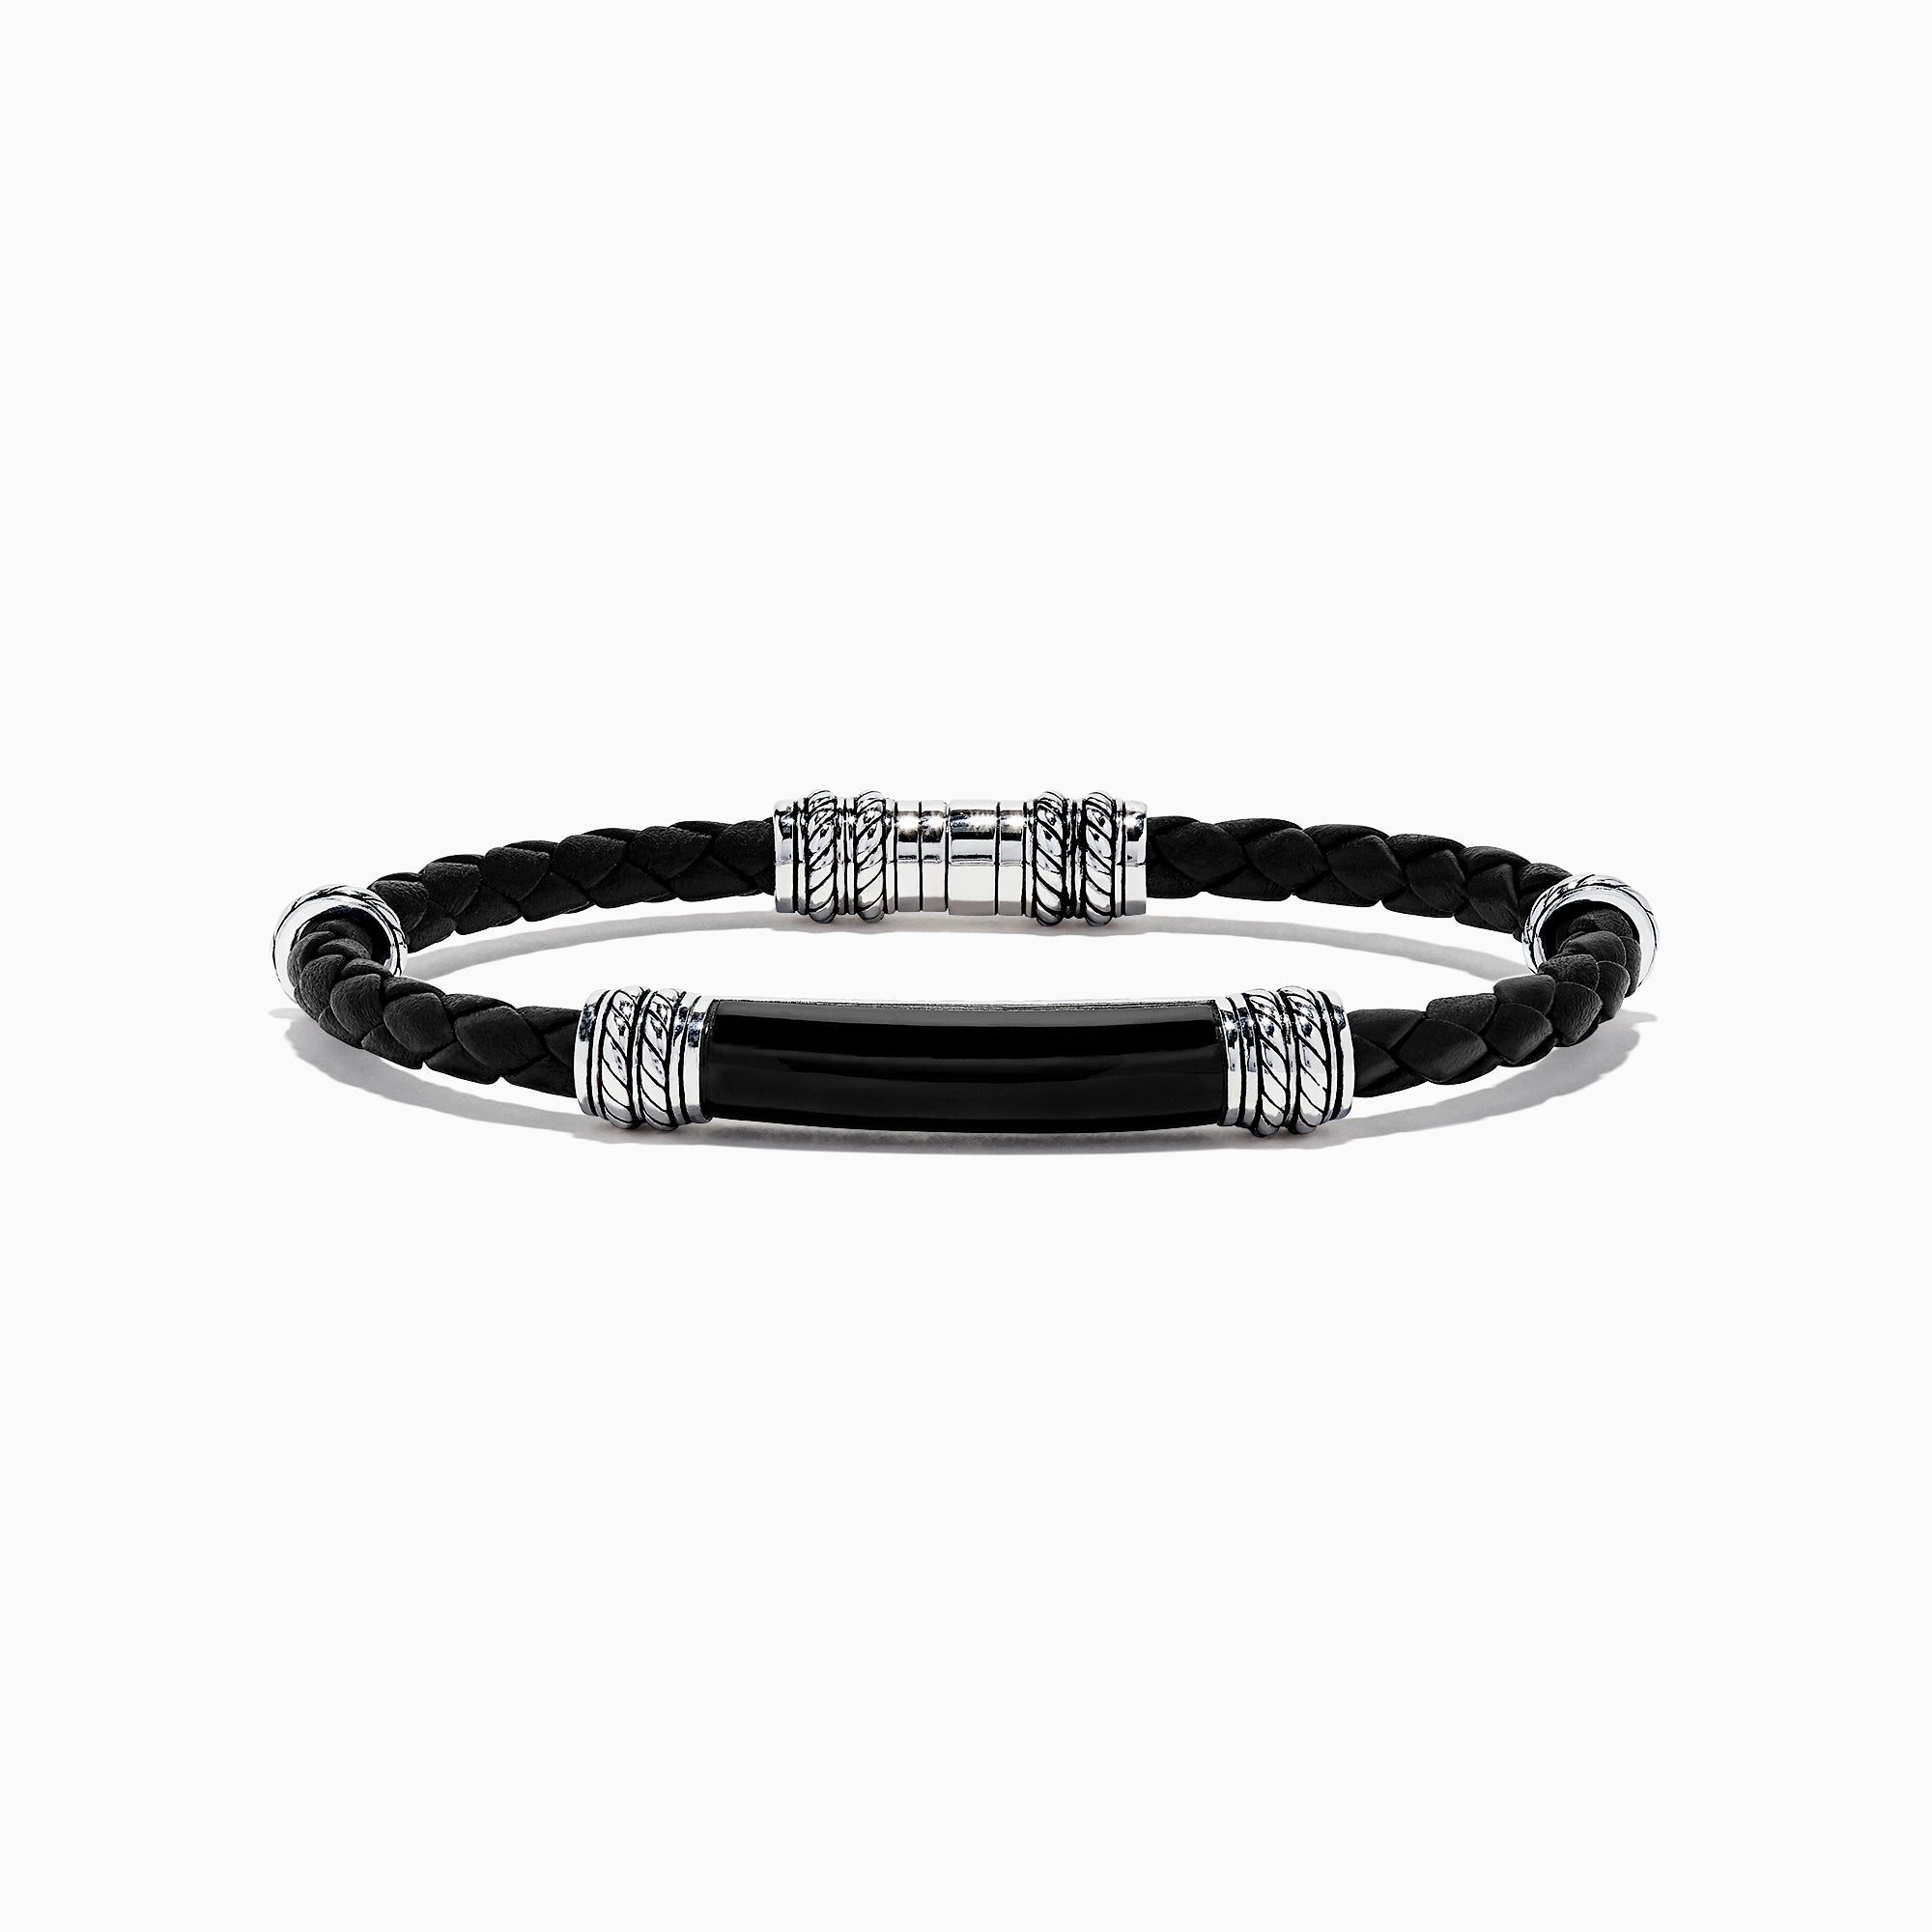 Effy Men's Sterling Silver and Leather Bangle - Black